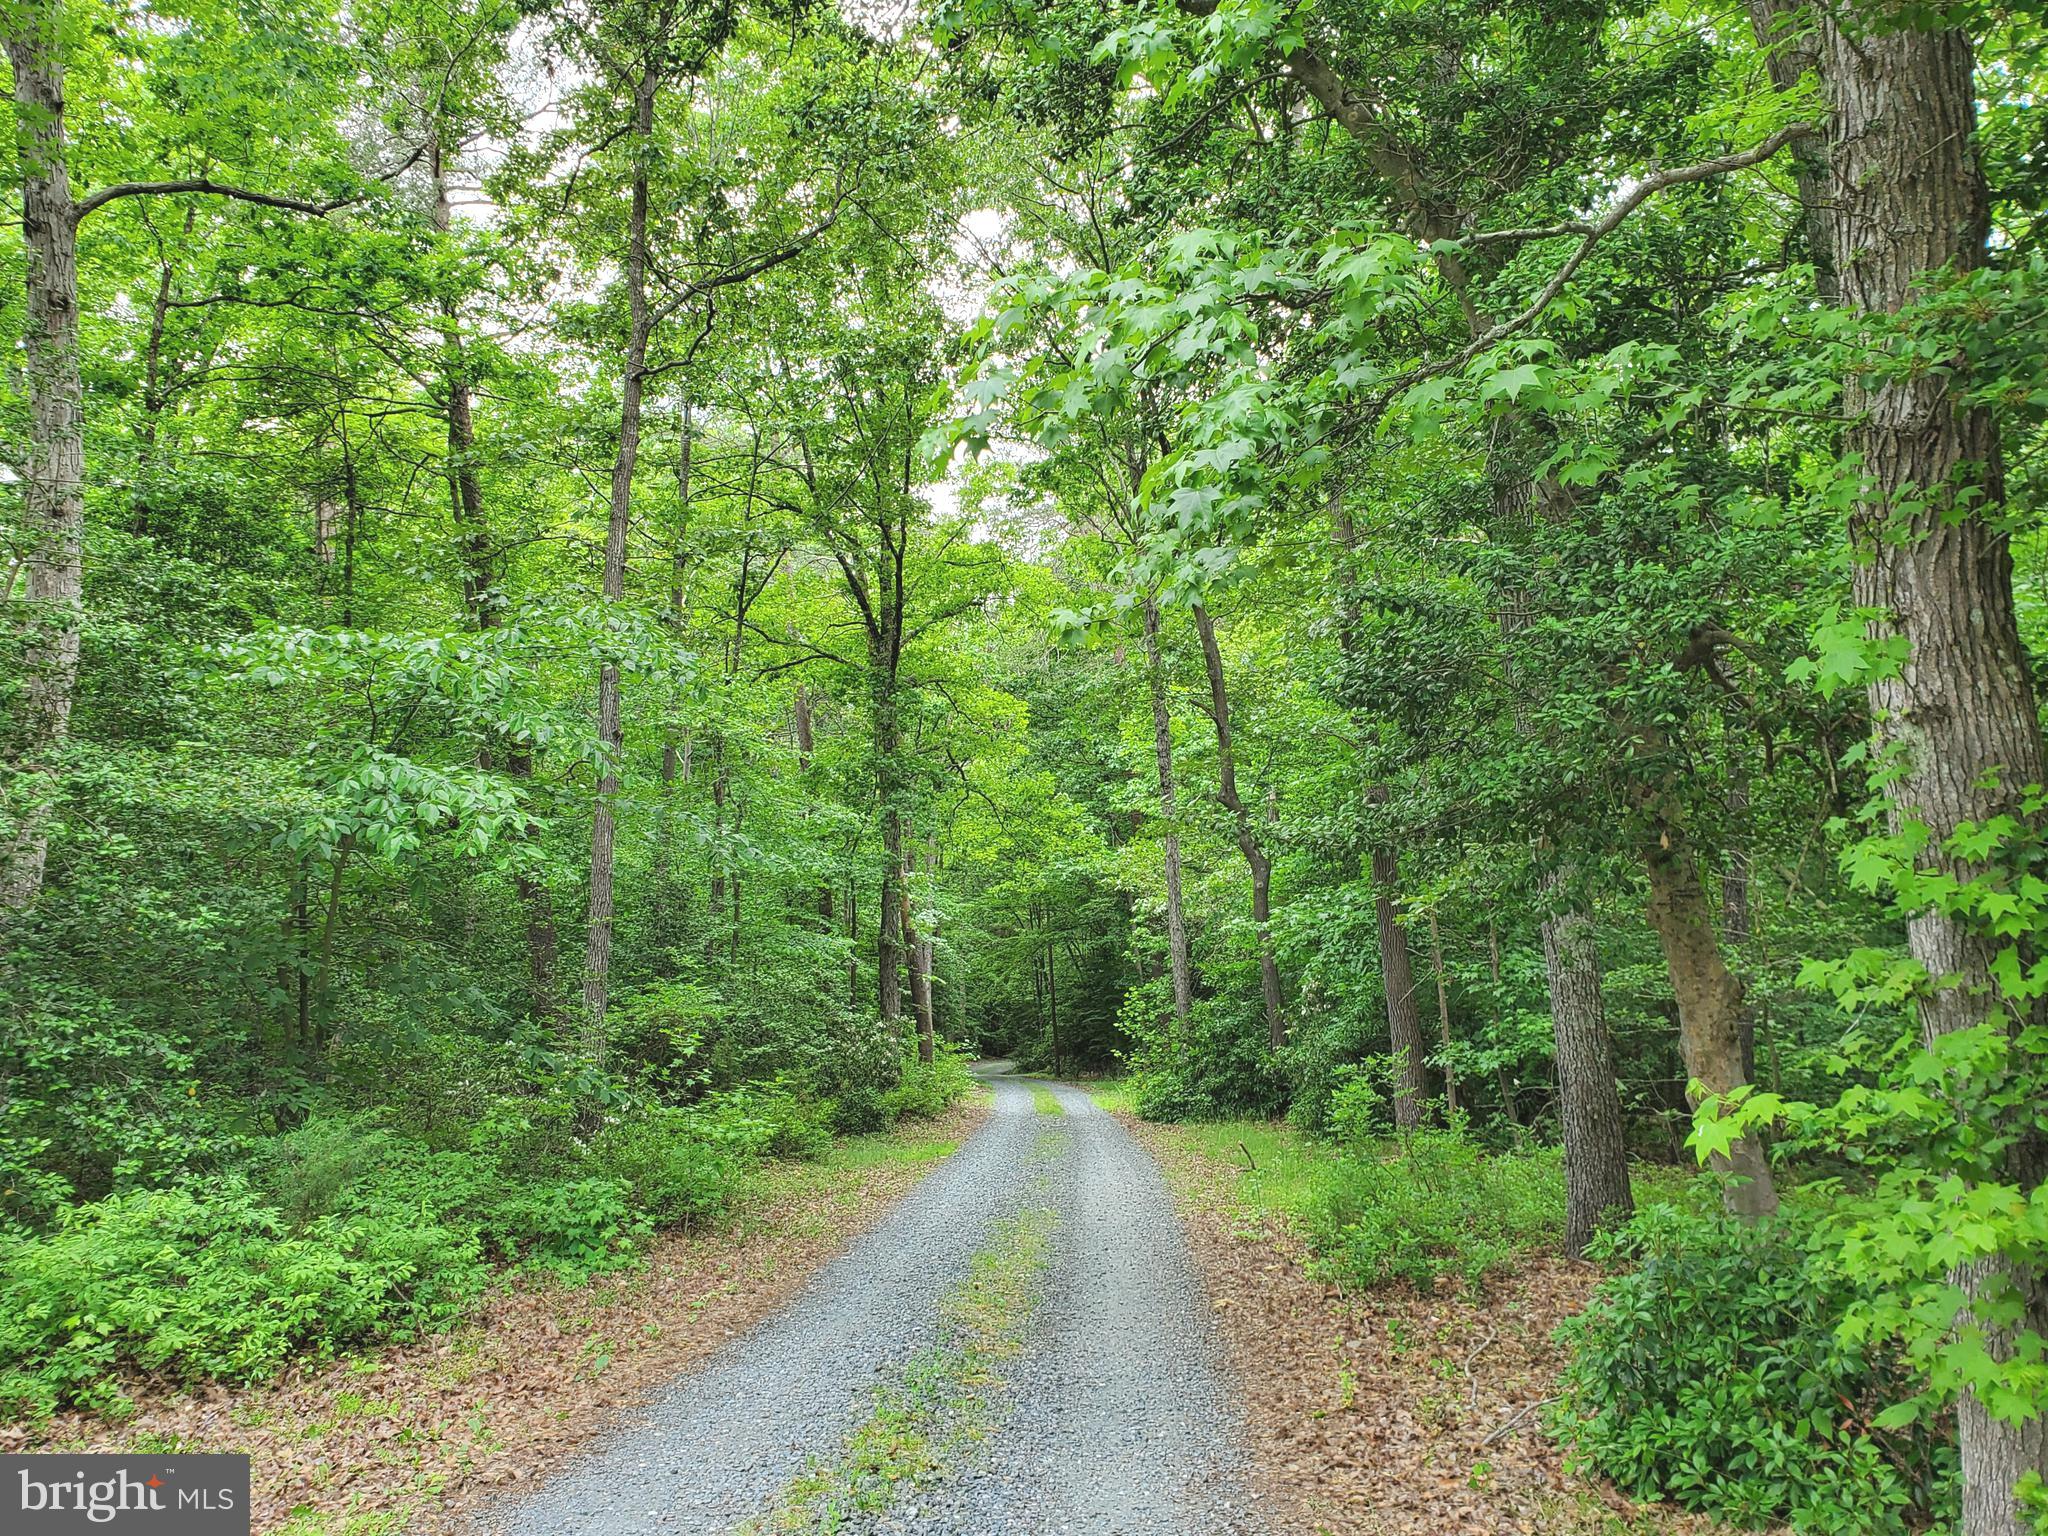 a view of a road with lush green forest